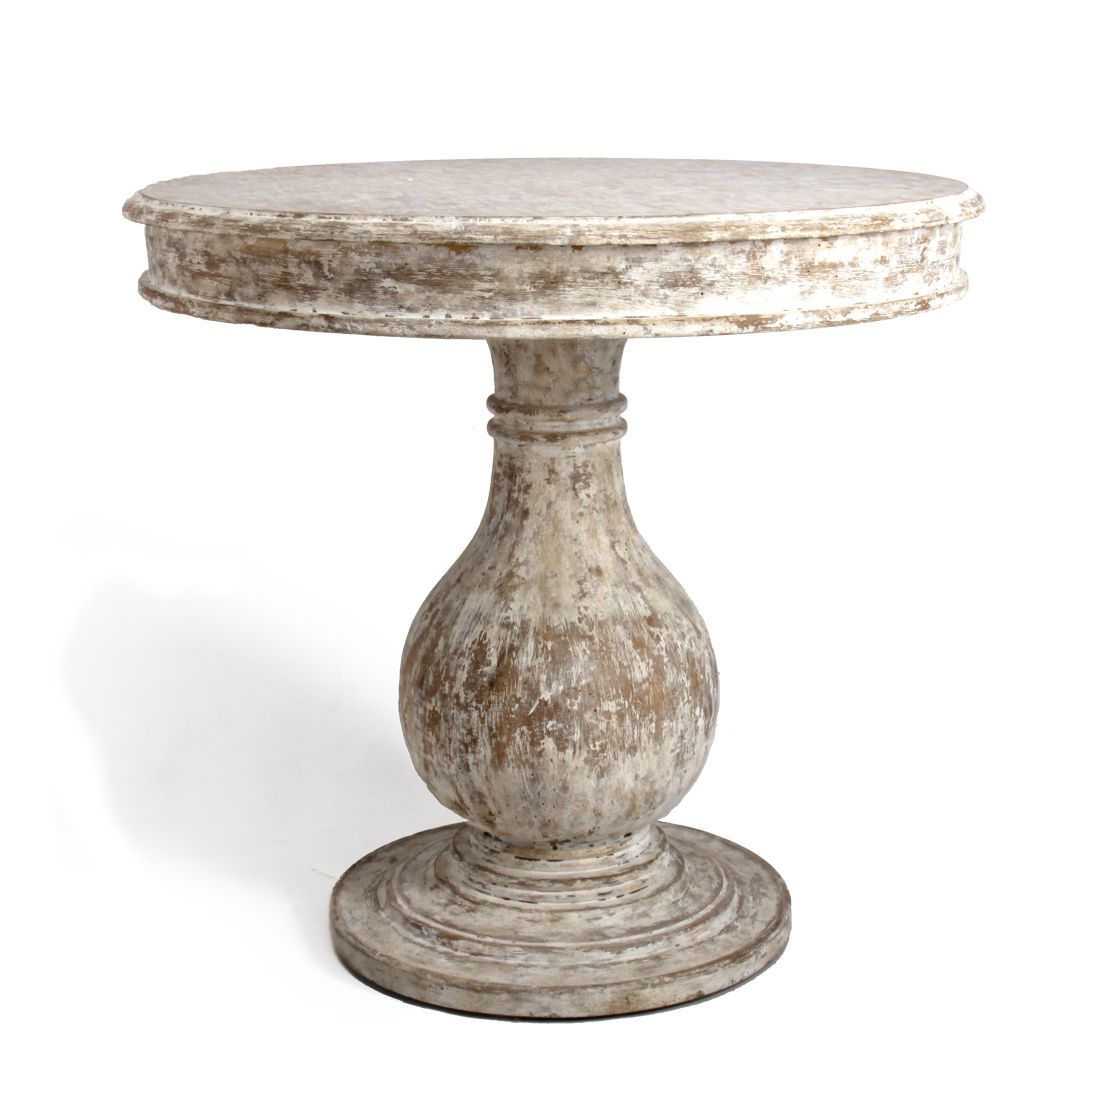 distressed french round entry table country living love accent hampton bay patio glass top corner with drawer tile outdoor furniture wicker and chairs gold bedside chair wood